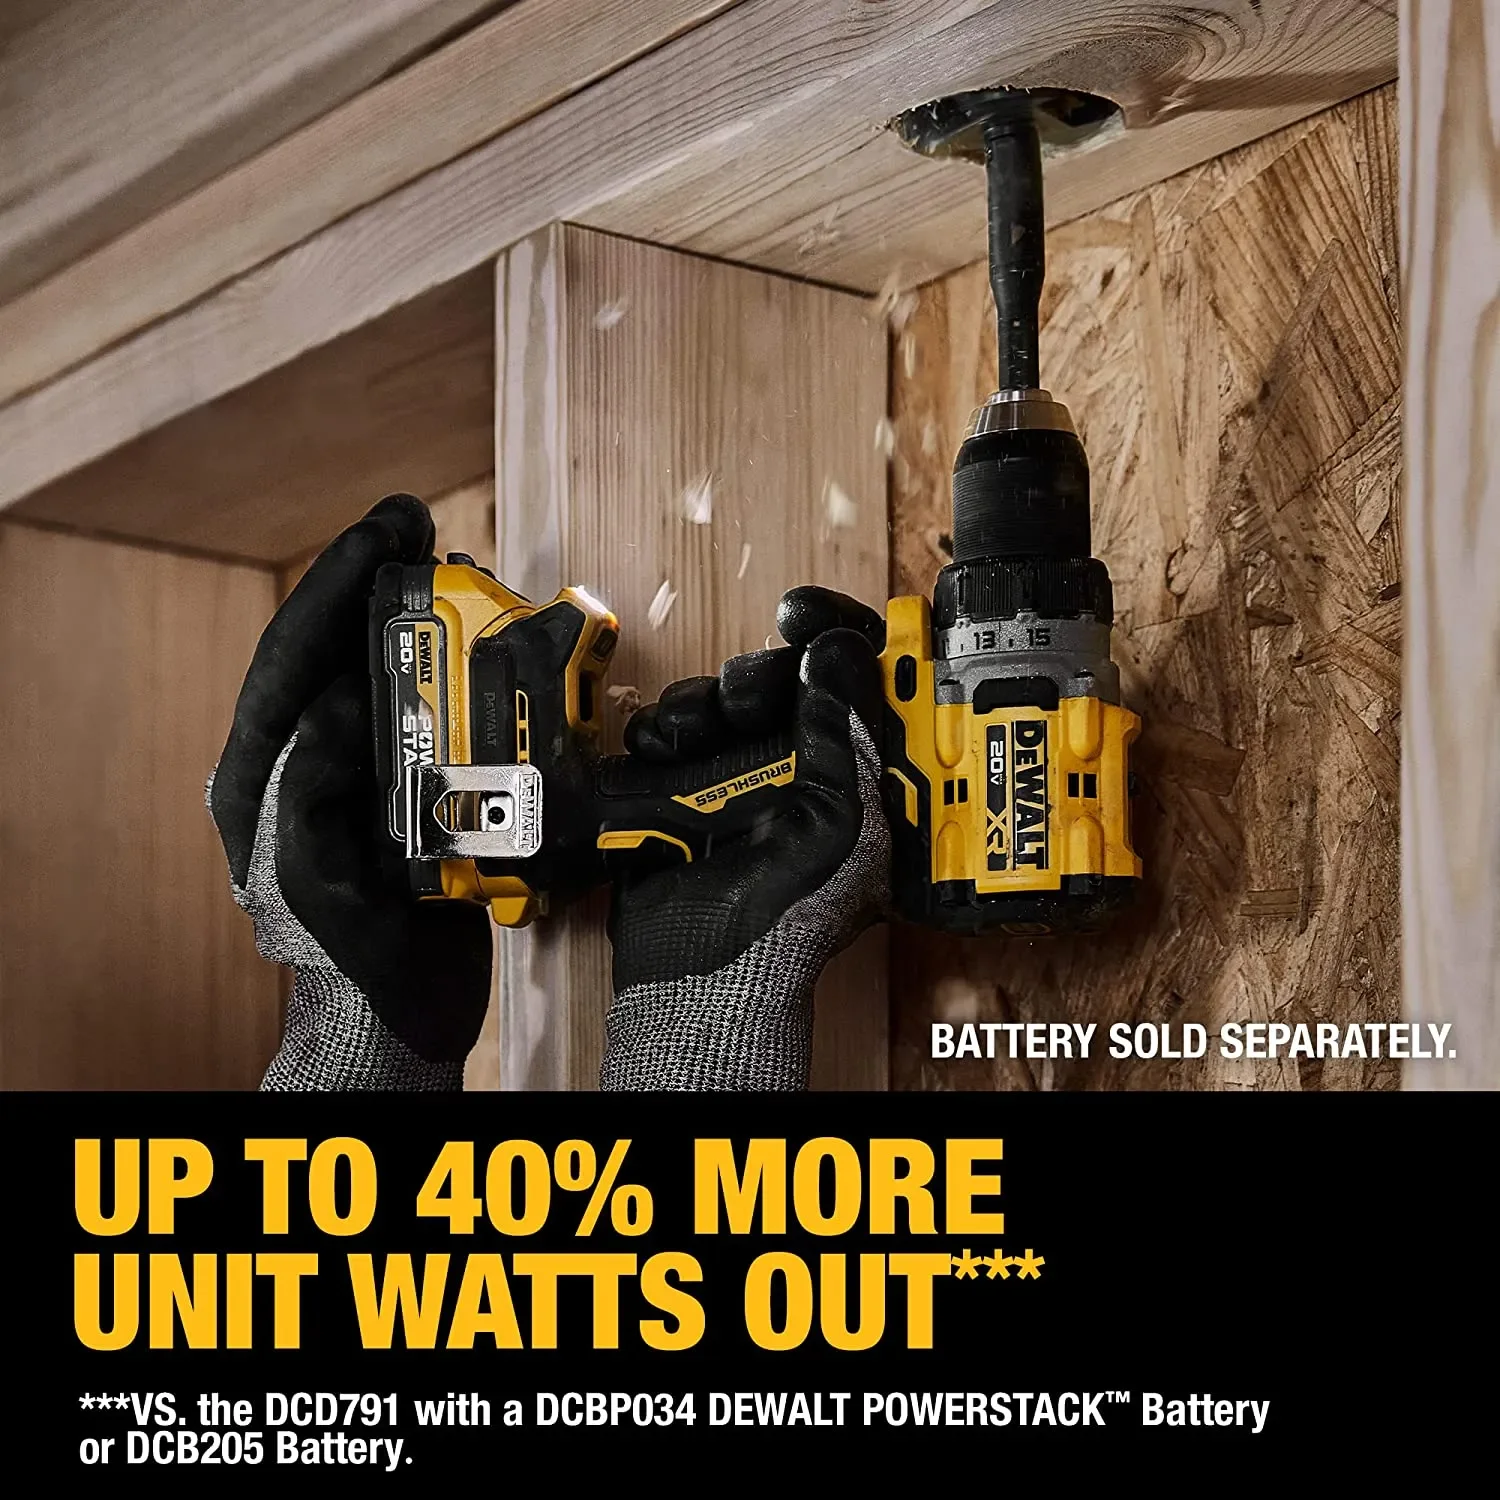 https://ae01.alicdn.com/kf/S91e9a2a92cf74a99a61d9f3b7e15dd46a/DEWALT-20V-Brushless-Cordless-Compact-Drill-Driver-DCD800-90N-m-Rechargeable-Original-Electric-Screwdriver-Household-Power.jpg